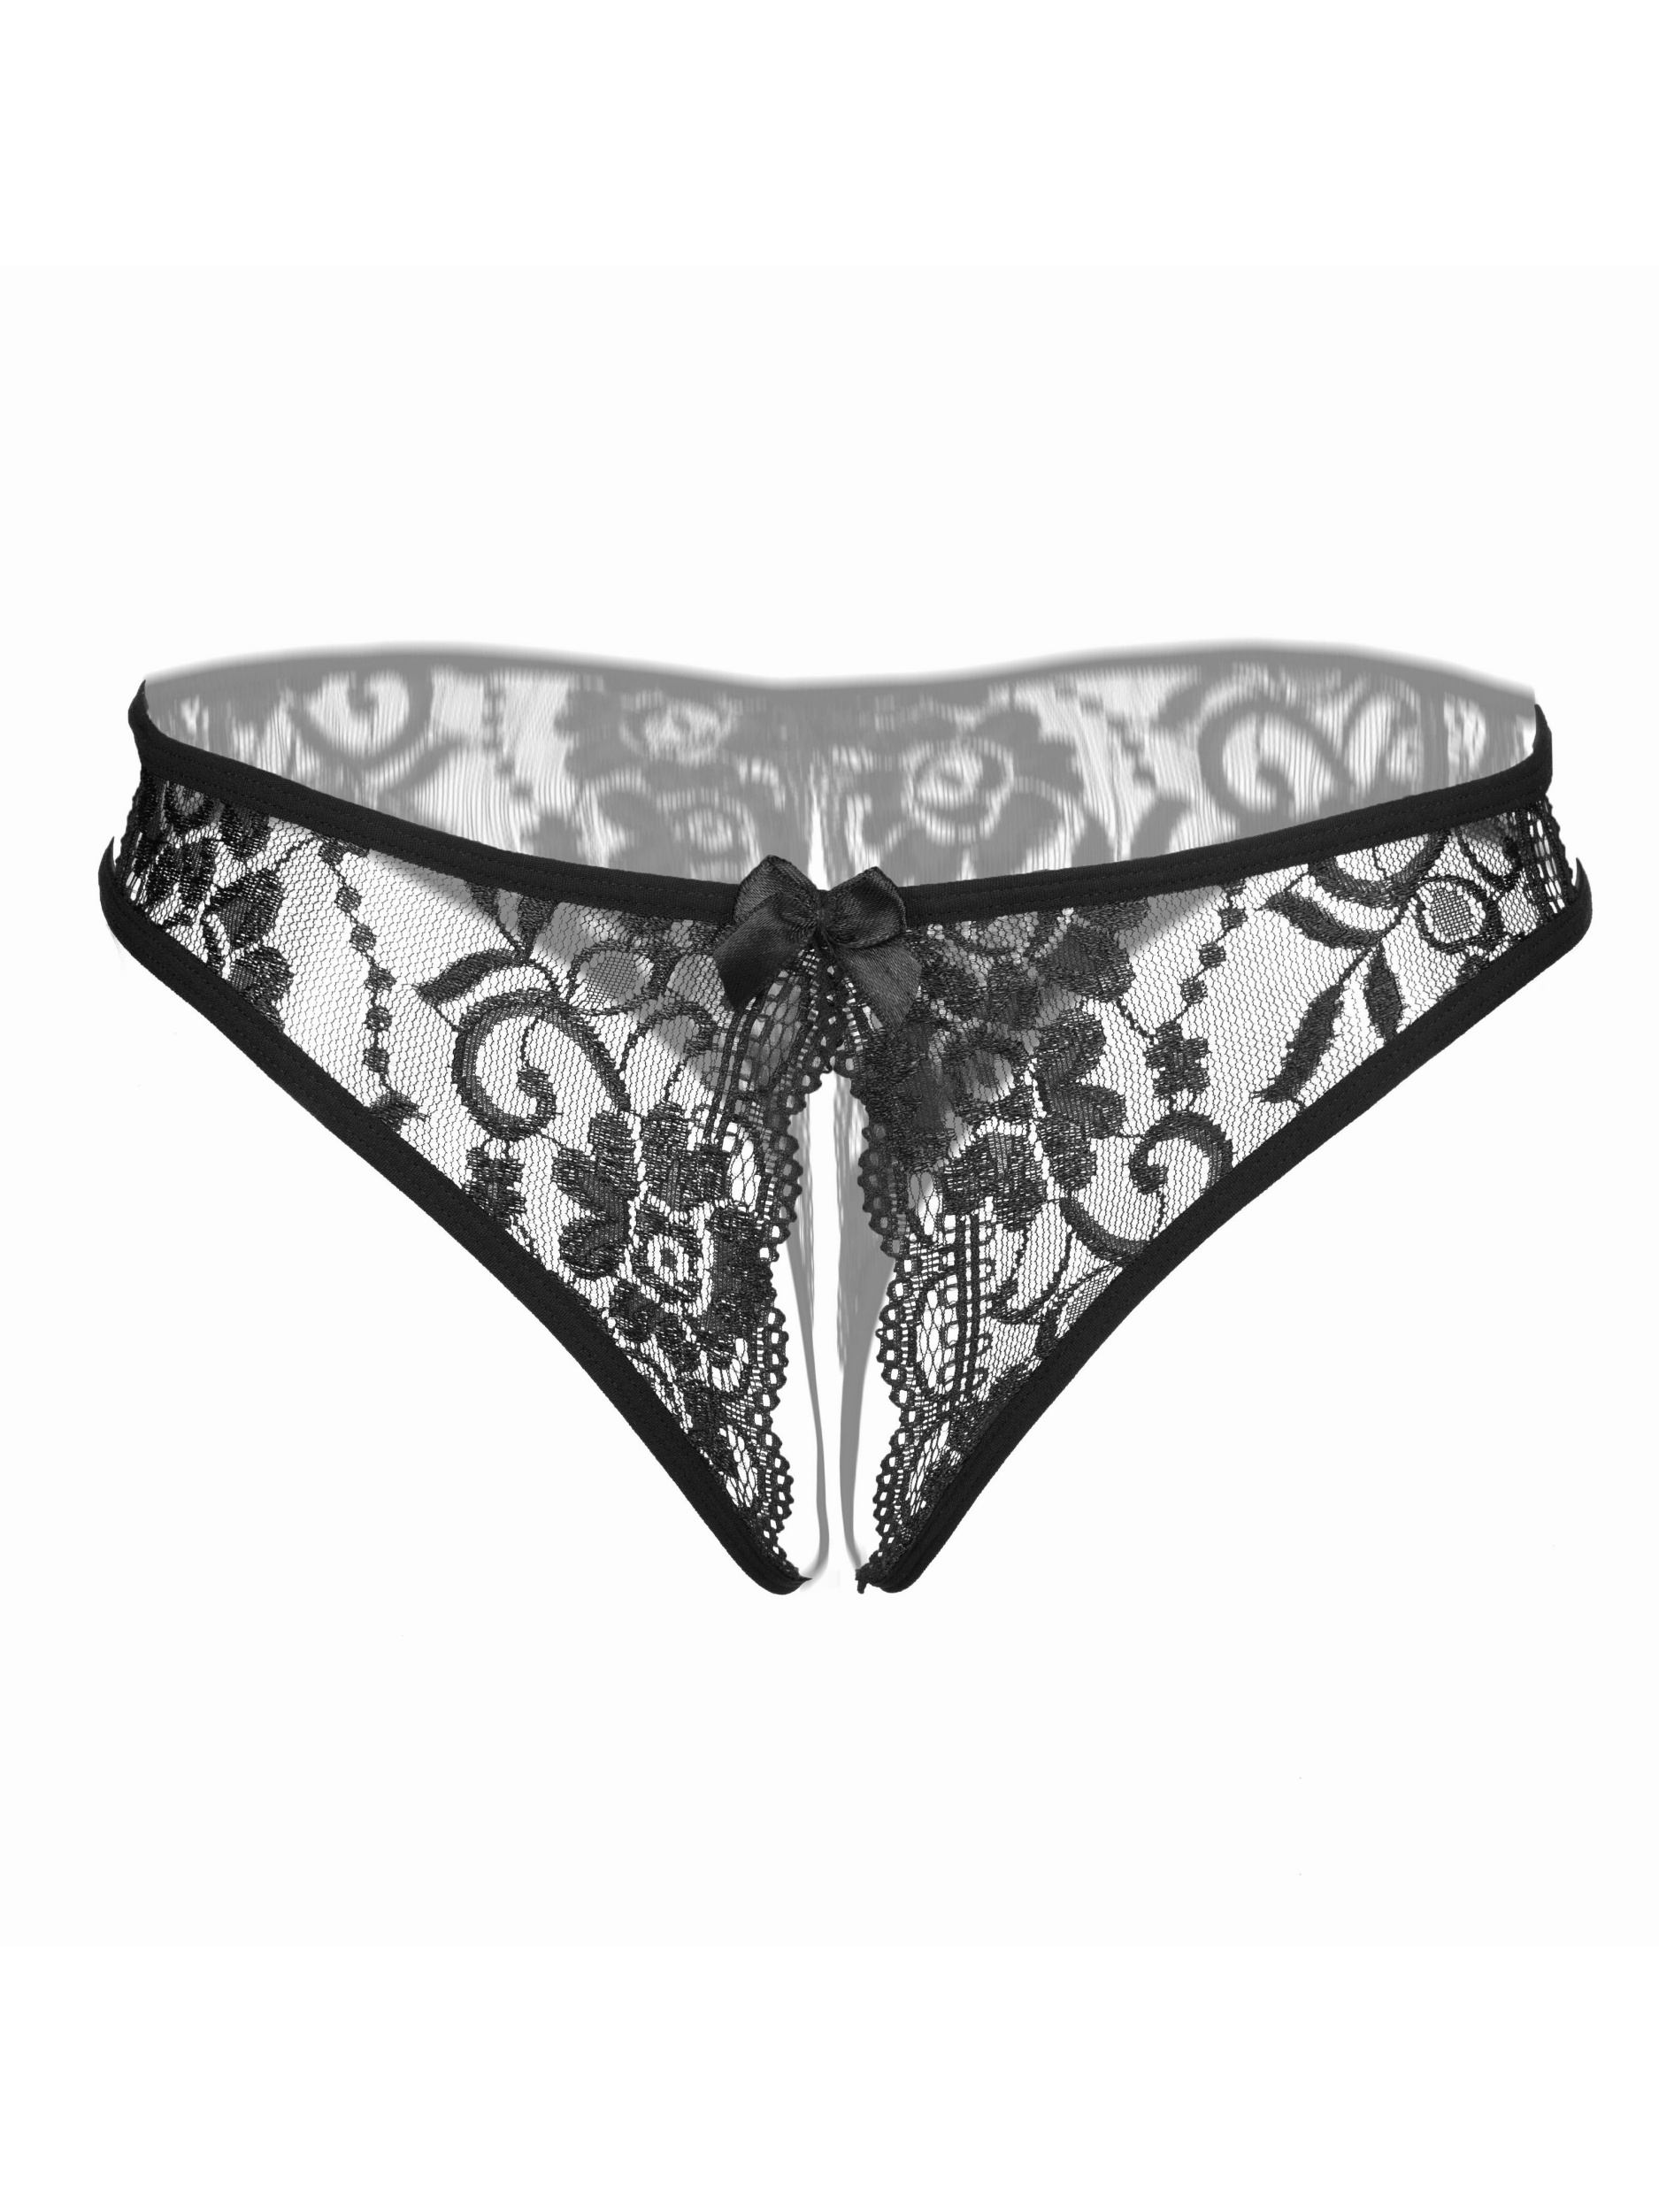 Fashion Women Sexy Lingerie Floral Hollow Lace G-string Open Crotch Briefs  Panties Thongs Underwear Knickers